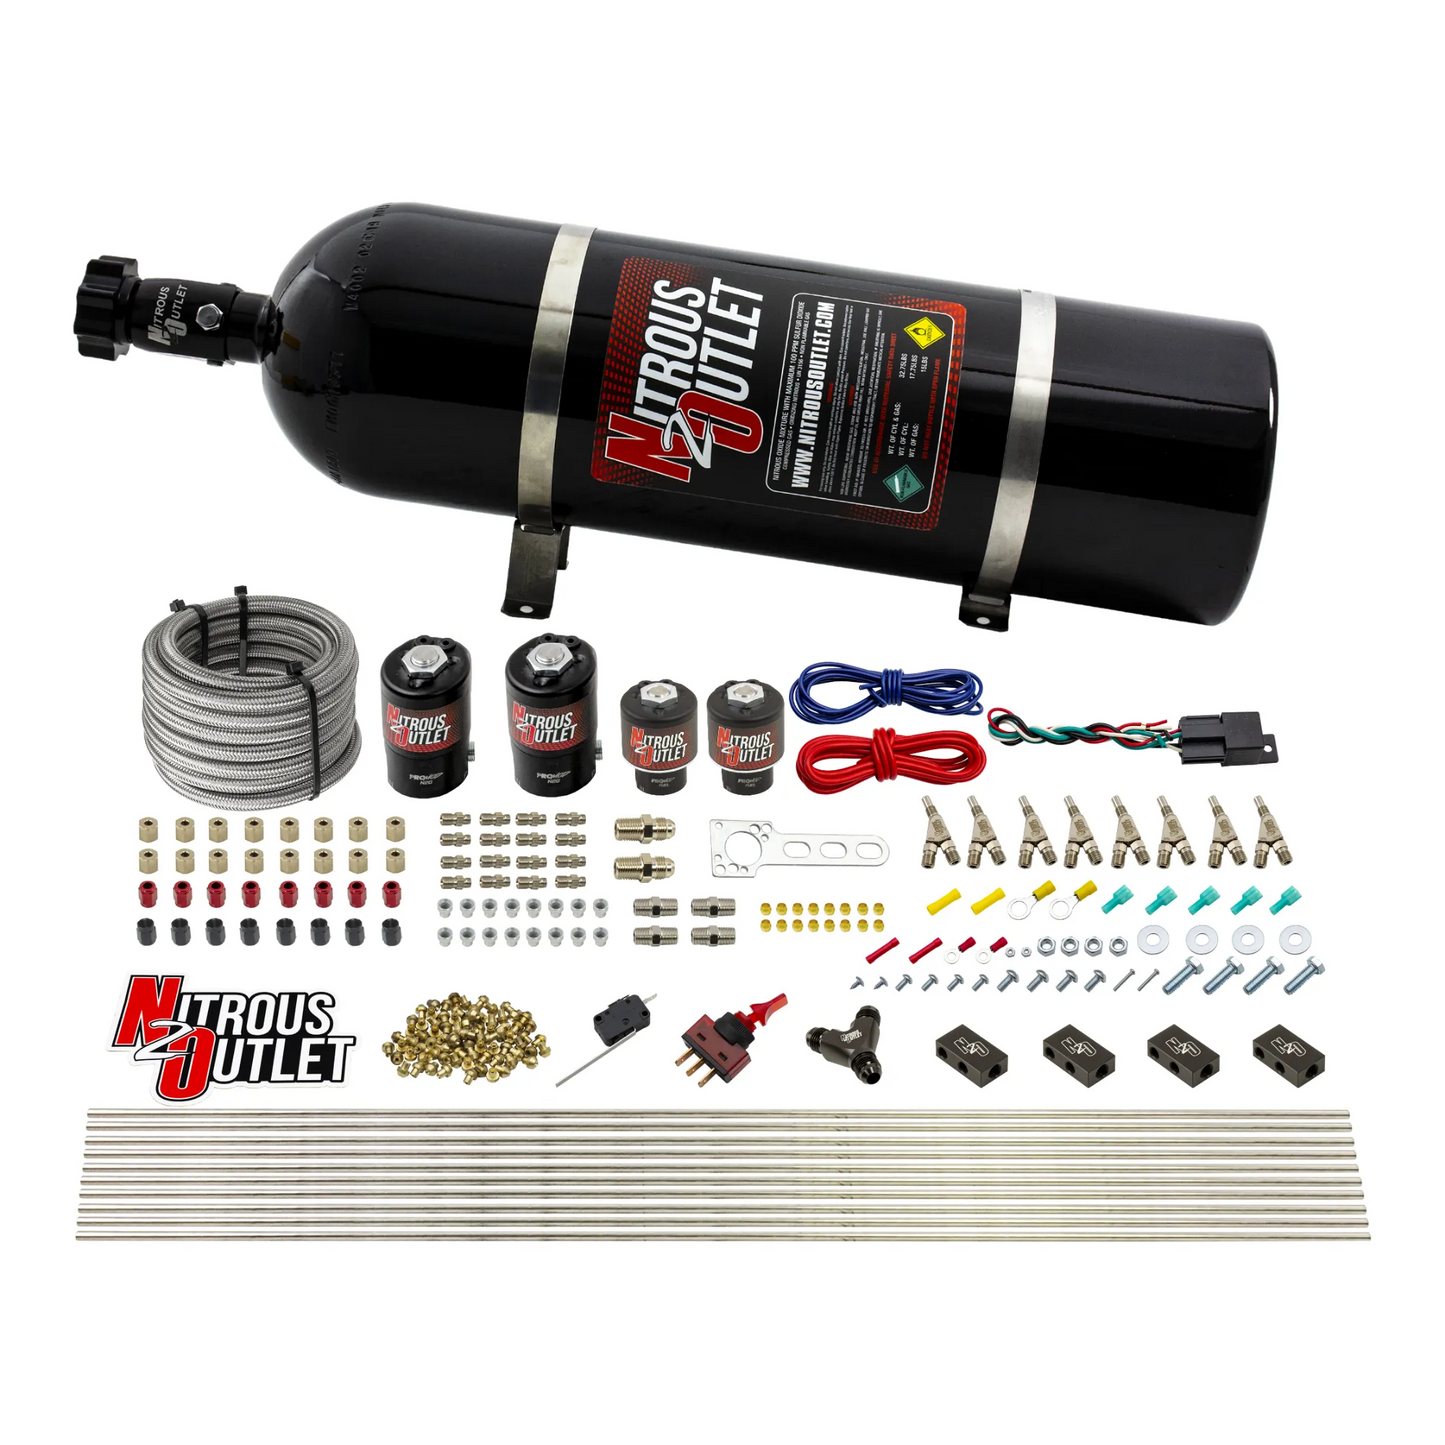 8 Cylinder Dual Stage Direct Port Nitrous System - .122 Nitrous/.177 Fuel Solenoids - Straight Blow Through Nozzles